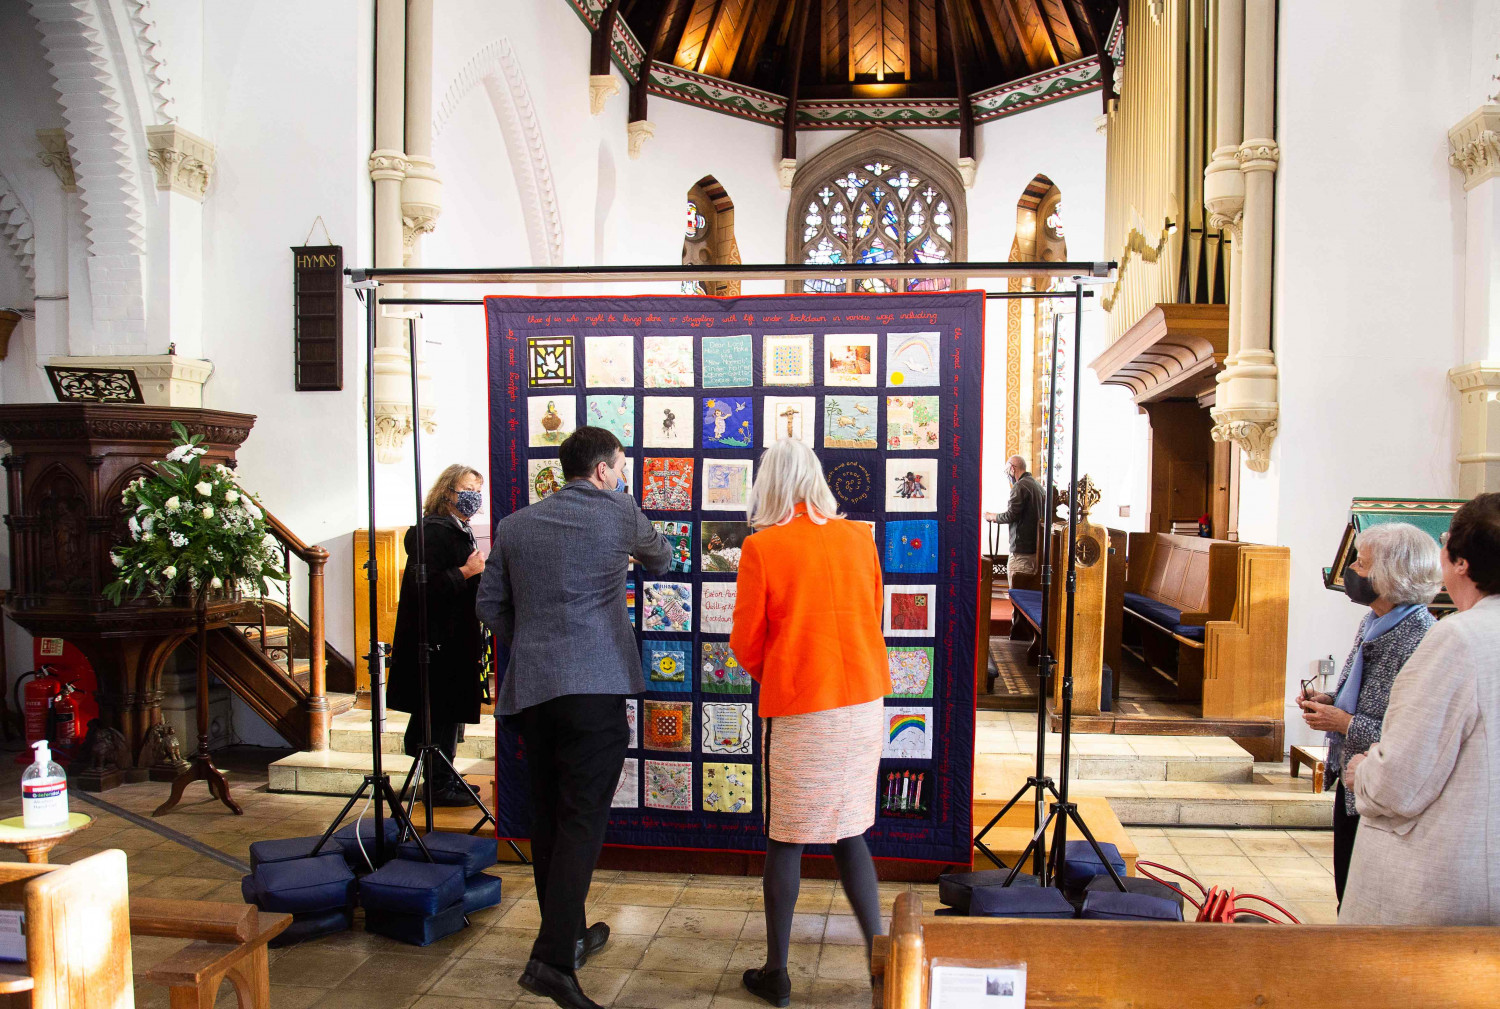 People looking at a textile quilt in a church